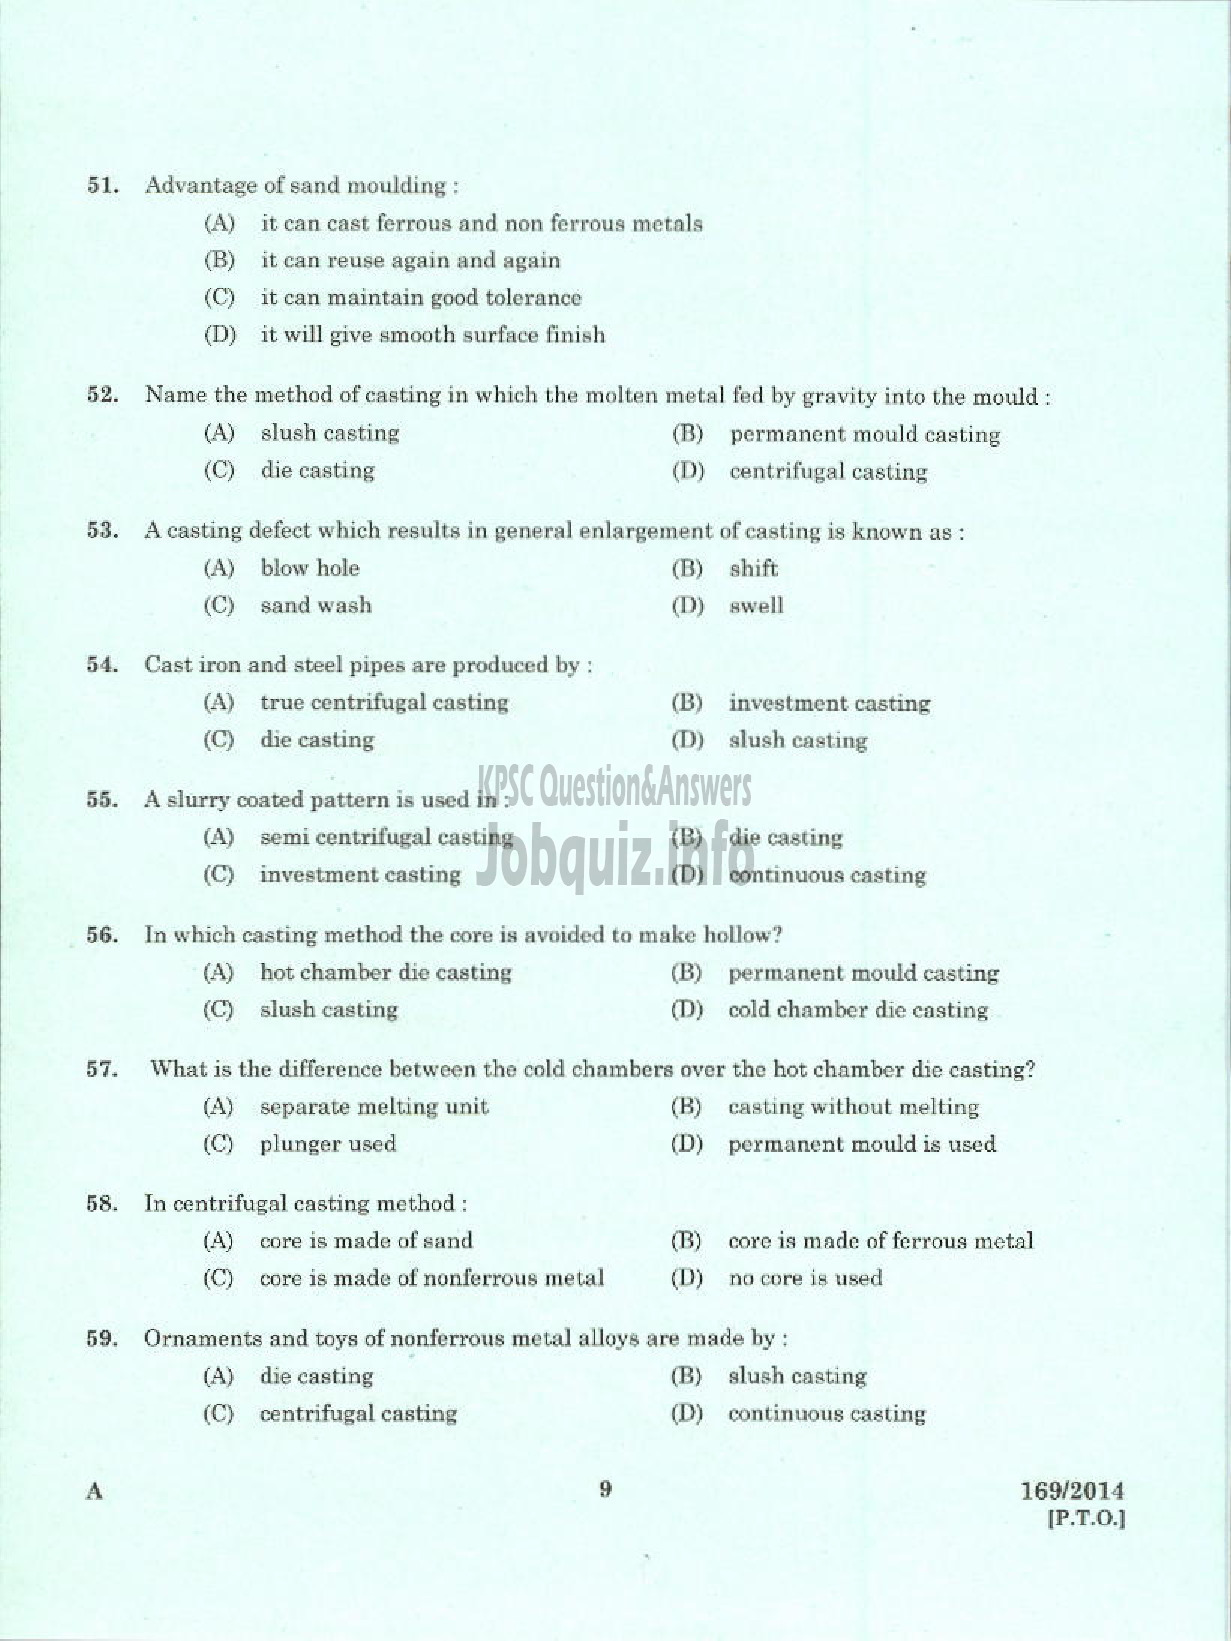 Kerala PSC Question Paper - TRADESMAN MOULDING AND FOUNDRY TECHNICAL EDUCATION TVPM PTA KTM AND TSR-7